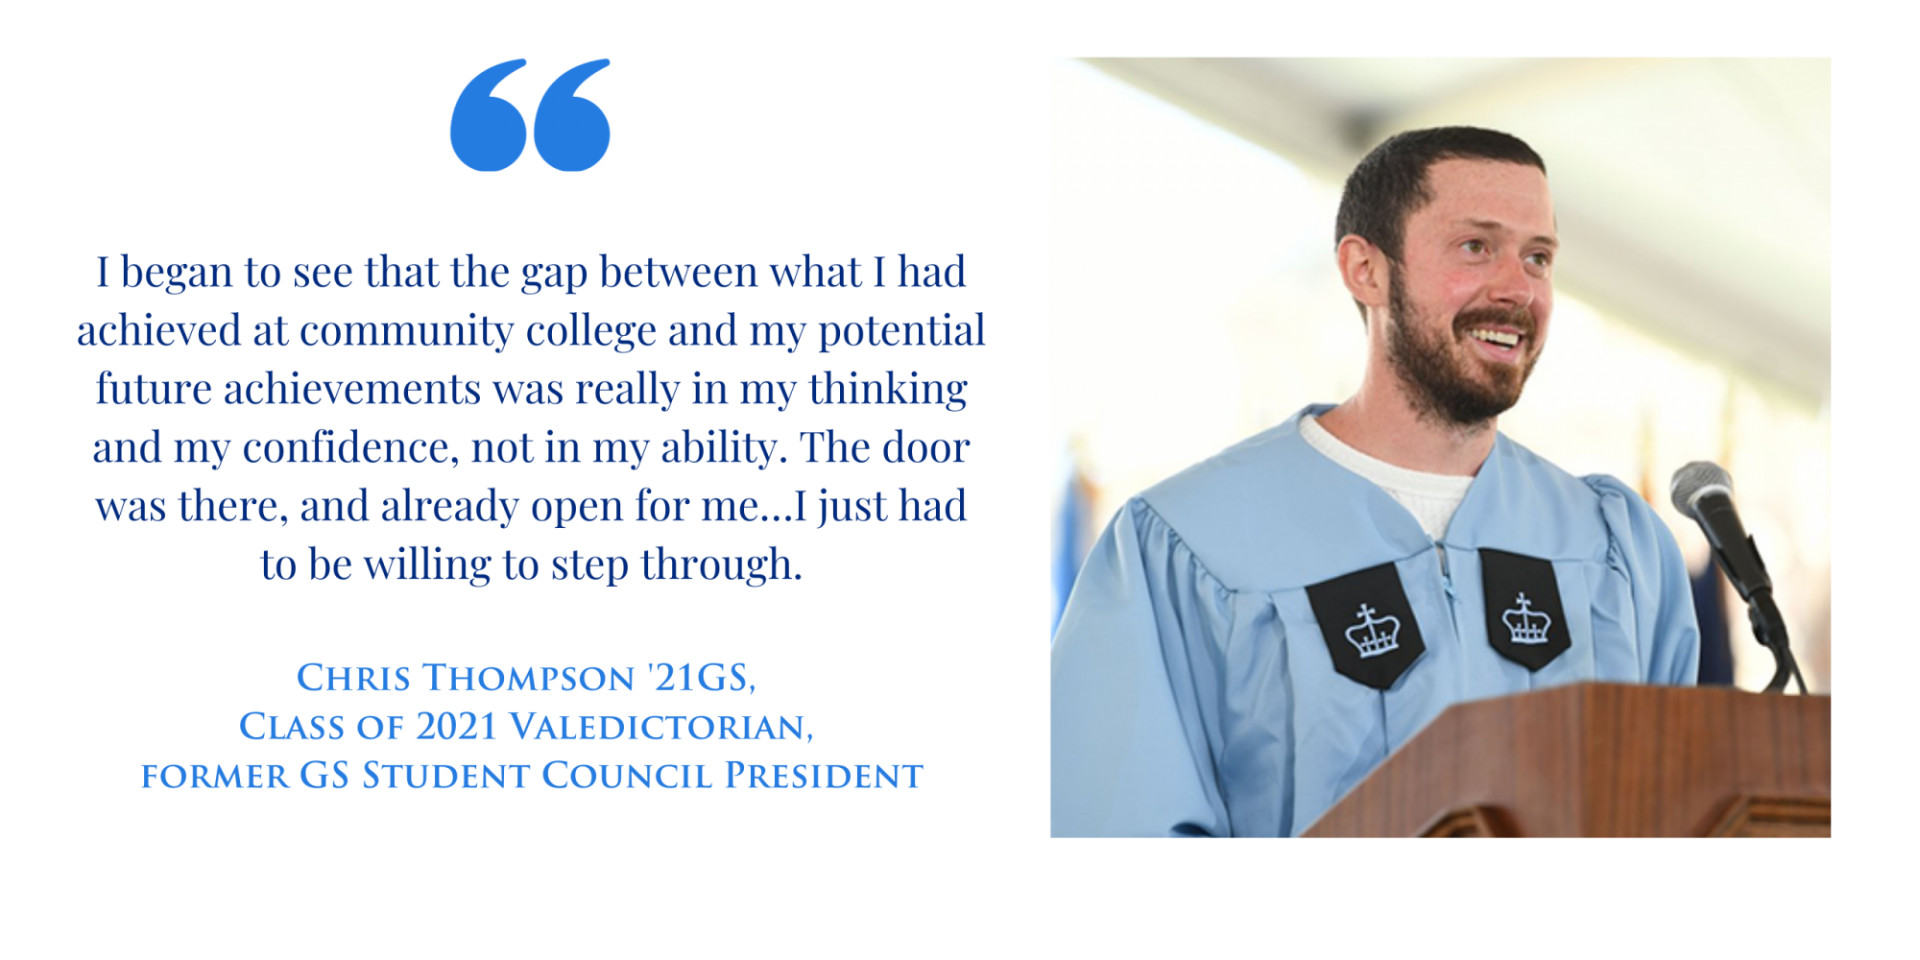 "I began to see that the gap between what I had achieved at community college and my potential future achievements was really in my thinking and my confidence, not in my ability. The door was there, and already open for me…I just had to be willing to step through." -Chris Thompson '21GS, Class of 2021 Valedictorian, former GS Student Council President